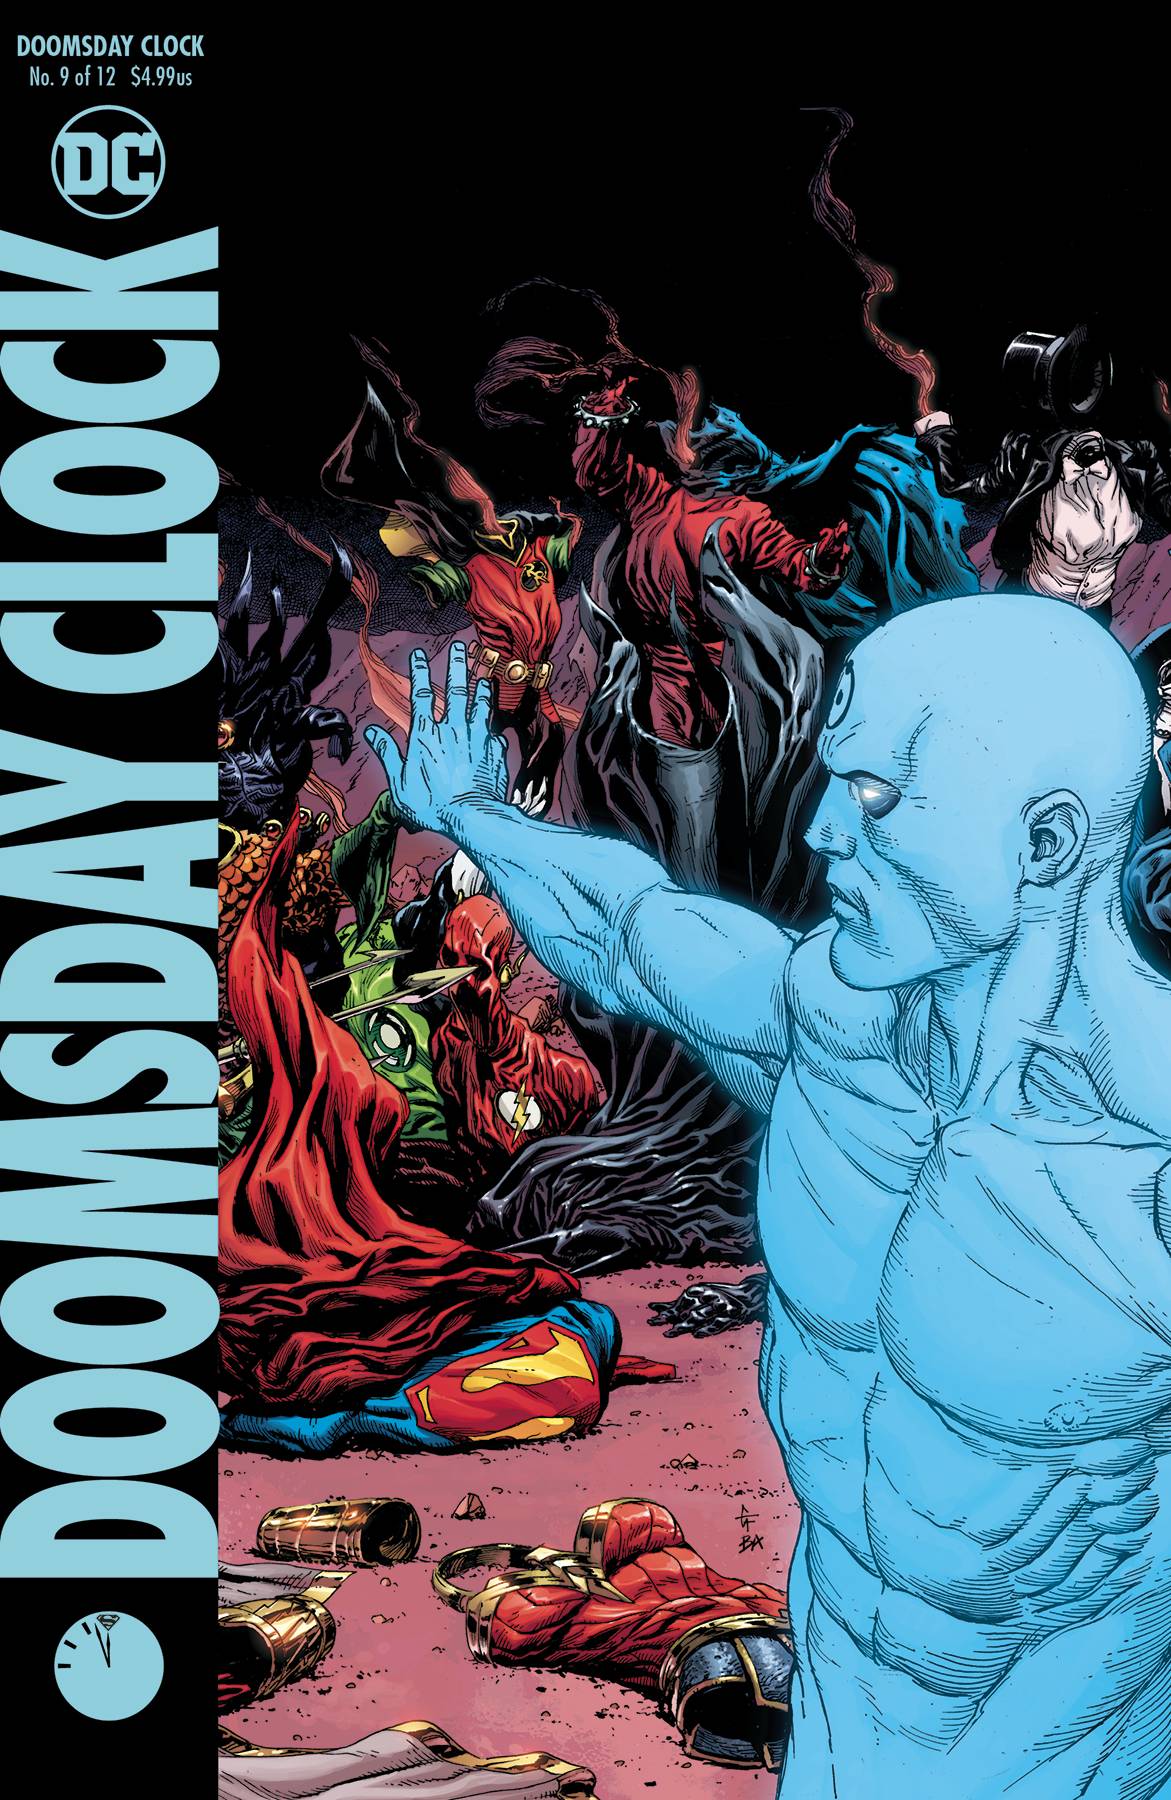 Doomsday Clock #9 Variant Edition (Of 12)